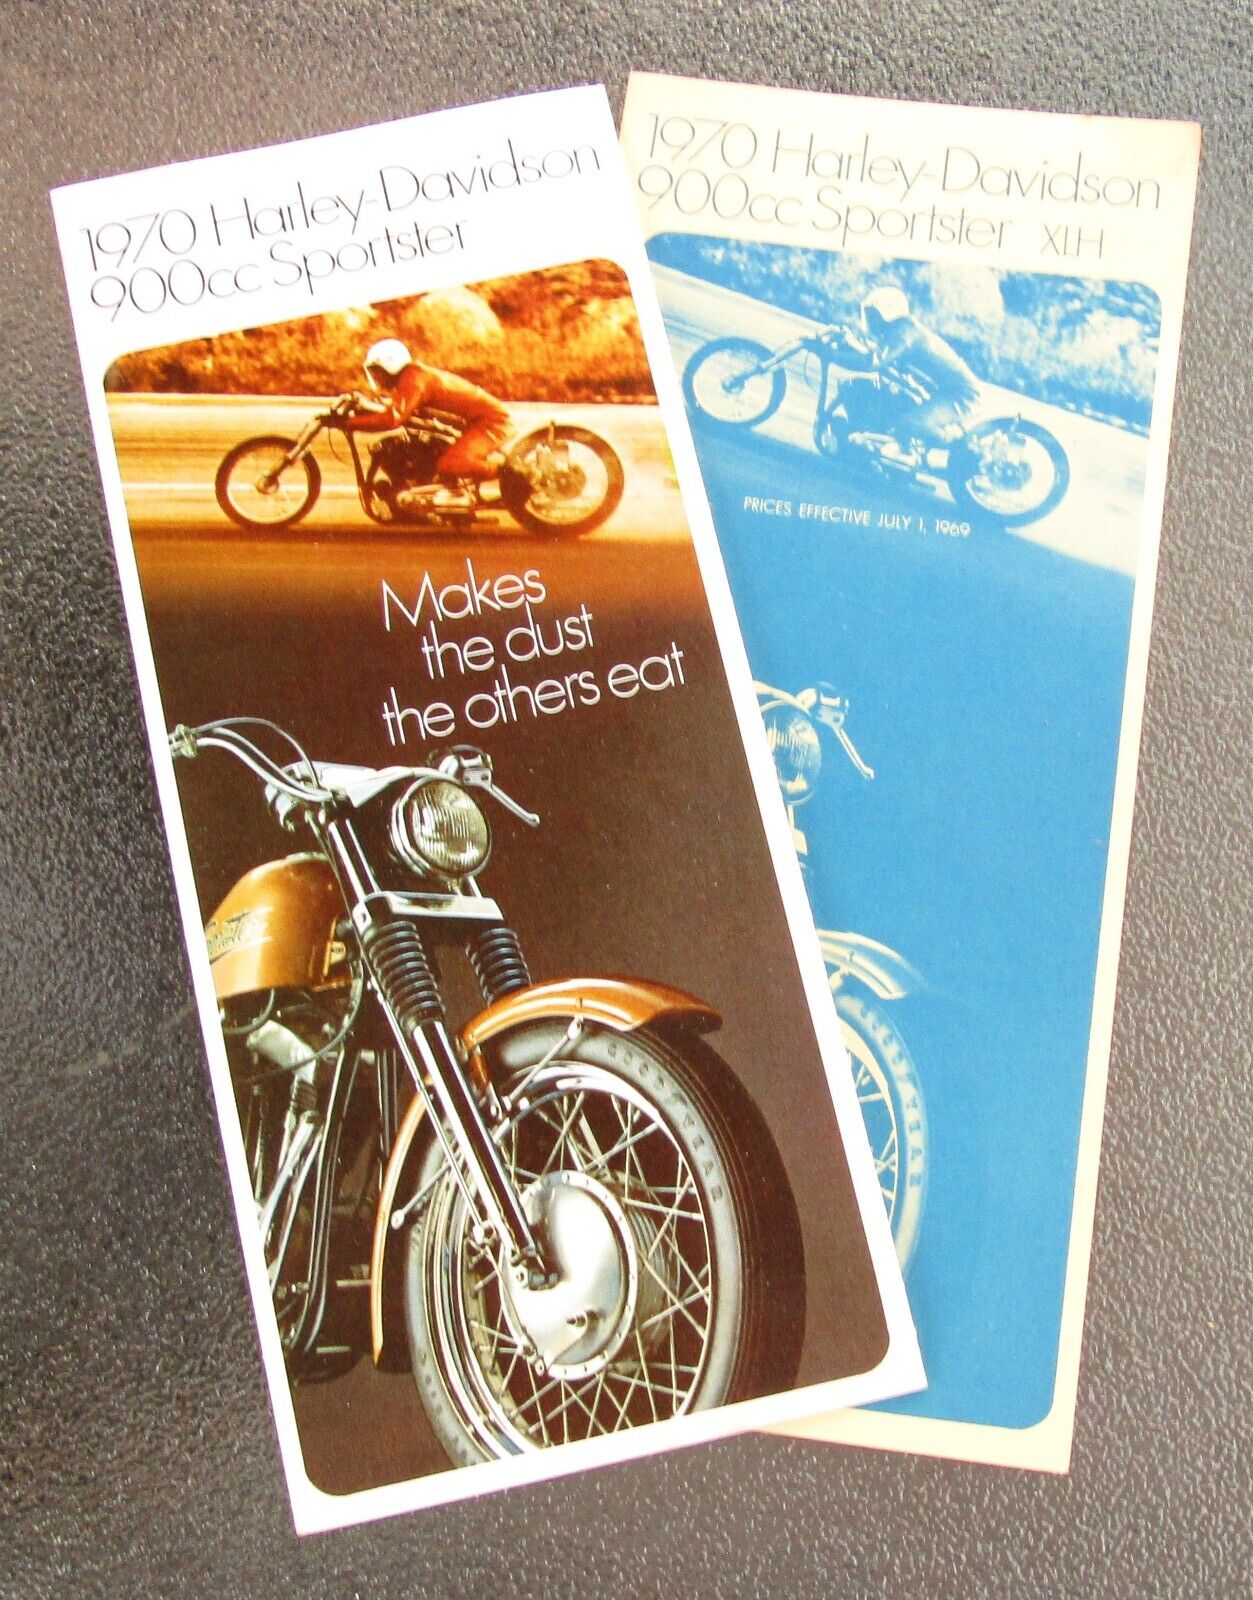 1970 Harley-Davidson 900cc Sportster Motorcycle Brochure And Separate Price List